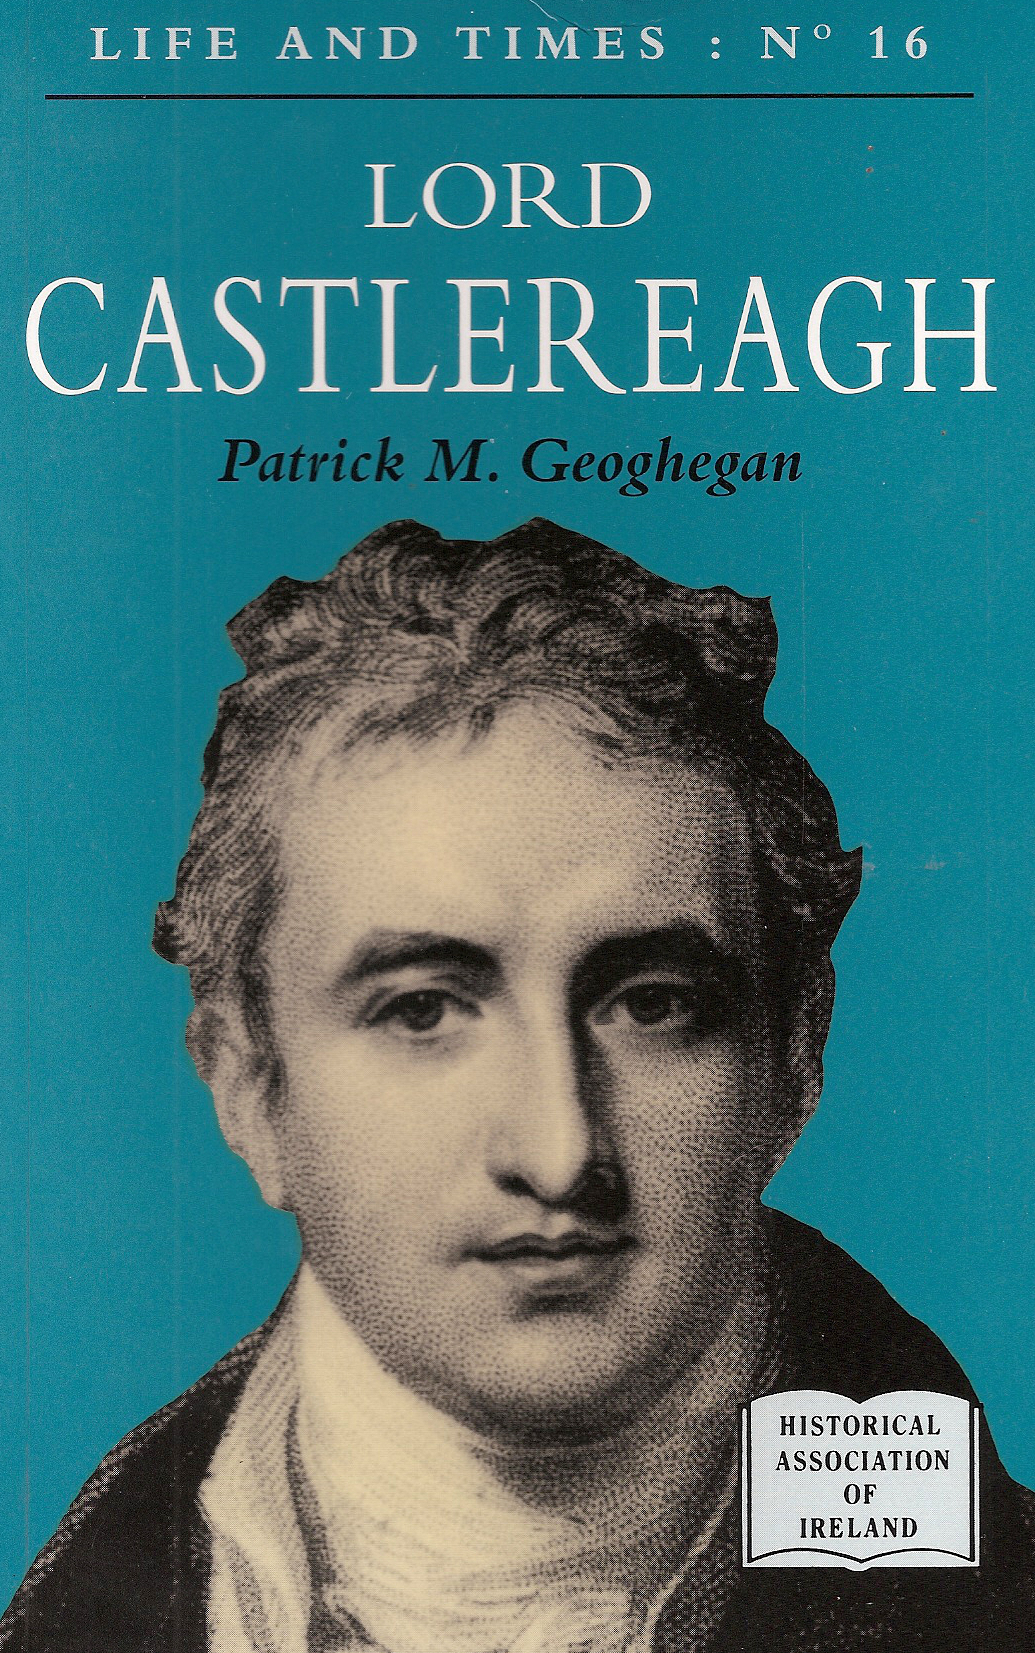  Lord Castlereagh (Life and Times 16)